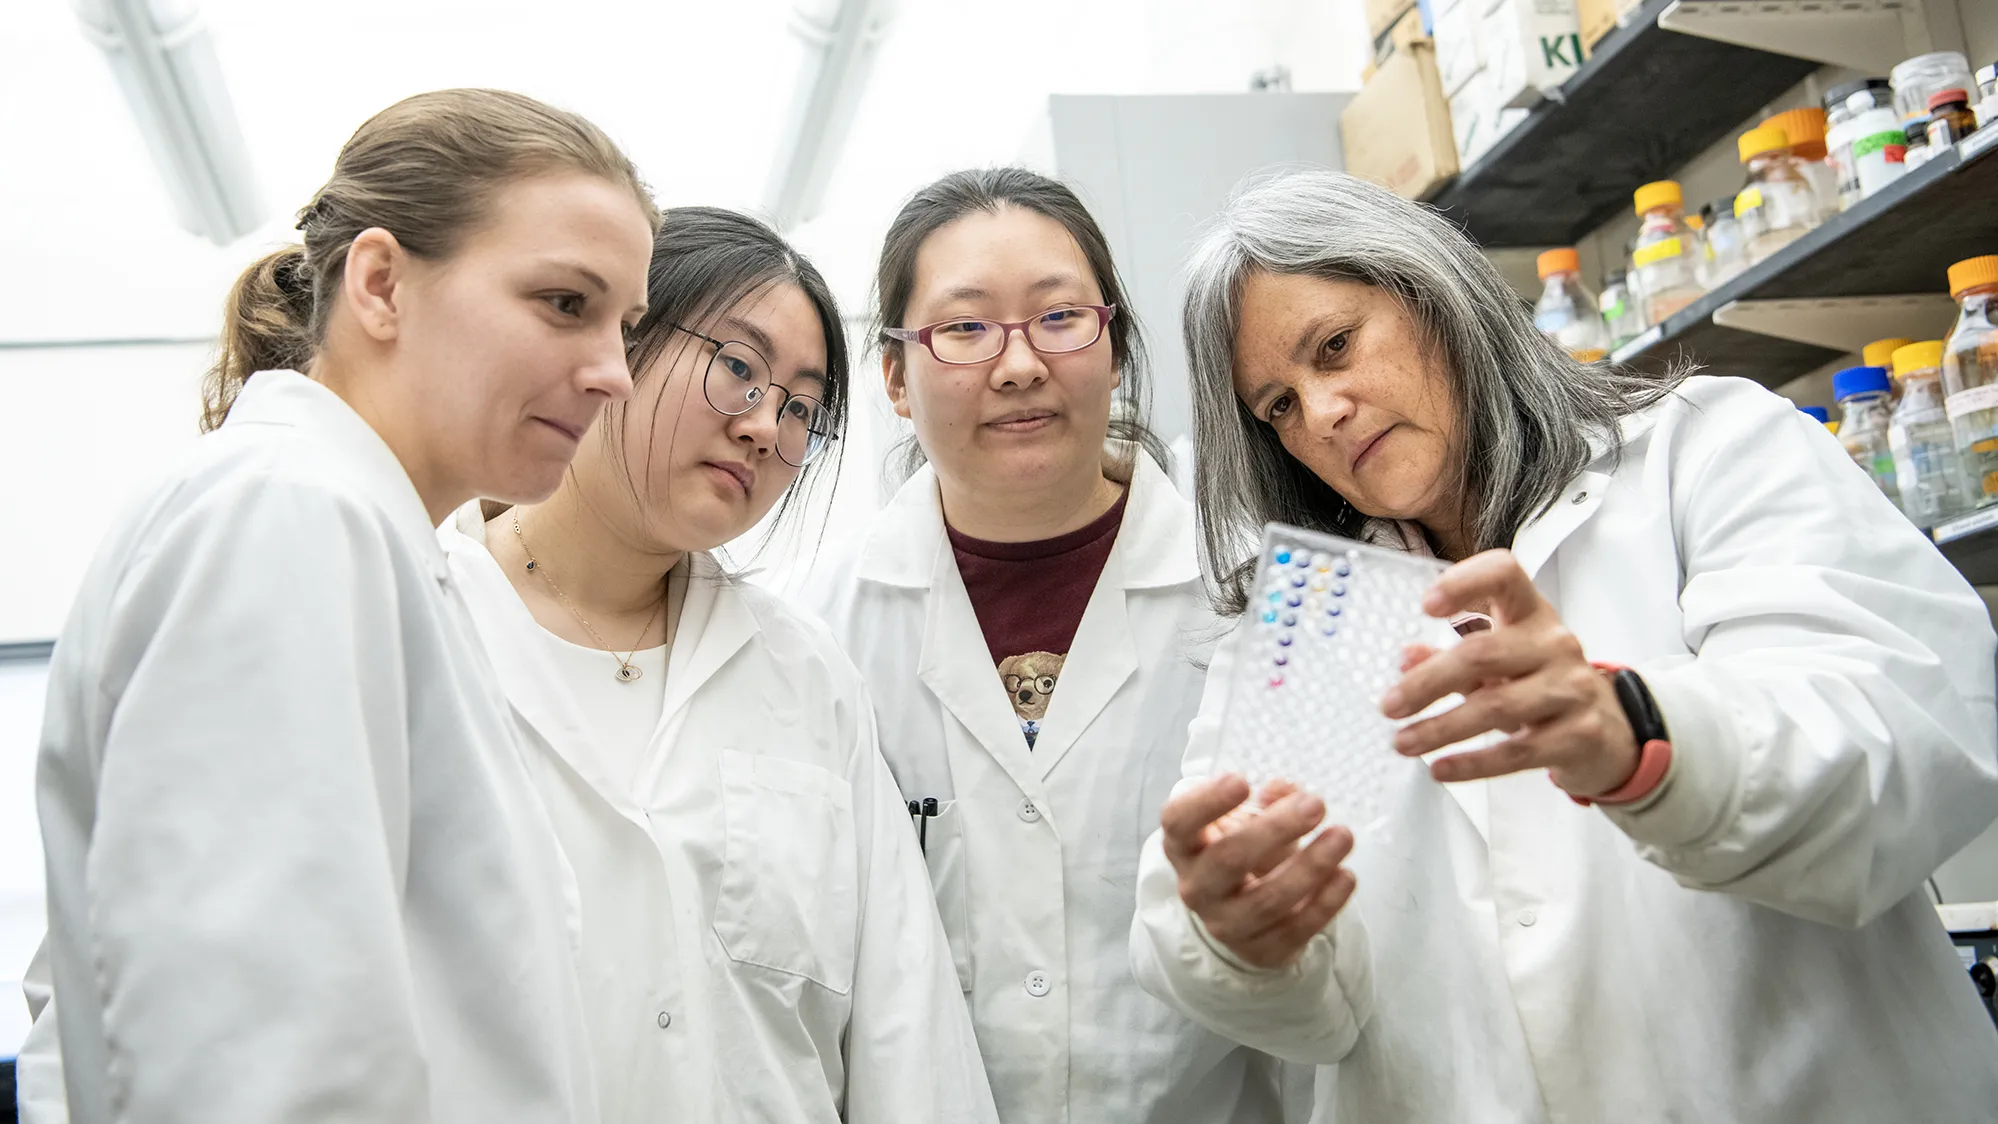 In a laboratory, Monica Giusti, a Peruvian woman with graying hair, shows three female students students a small clear tray with different antioxidant pigments held in rows of divots. They’re all focused on those pigments either looking studious or pleased.